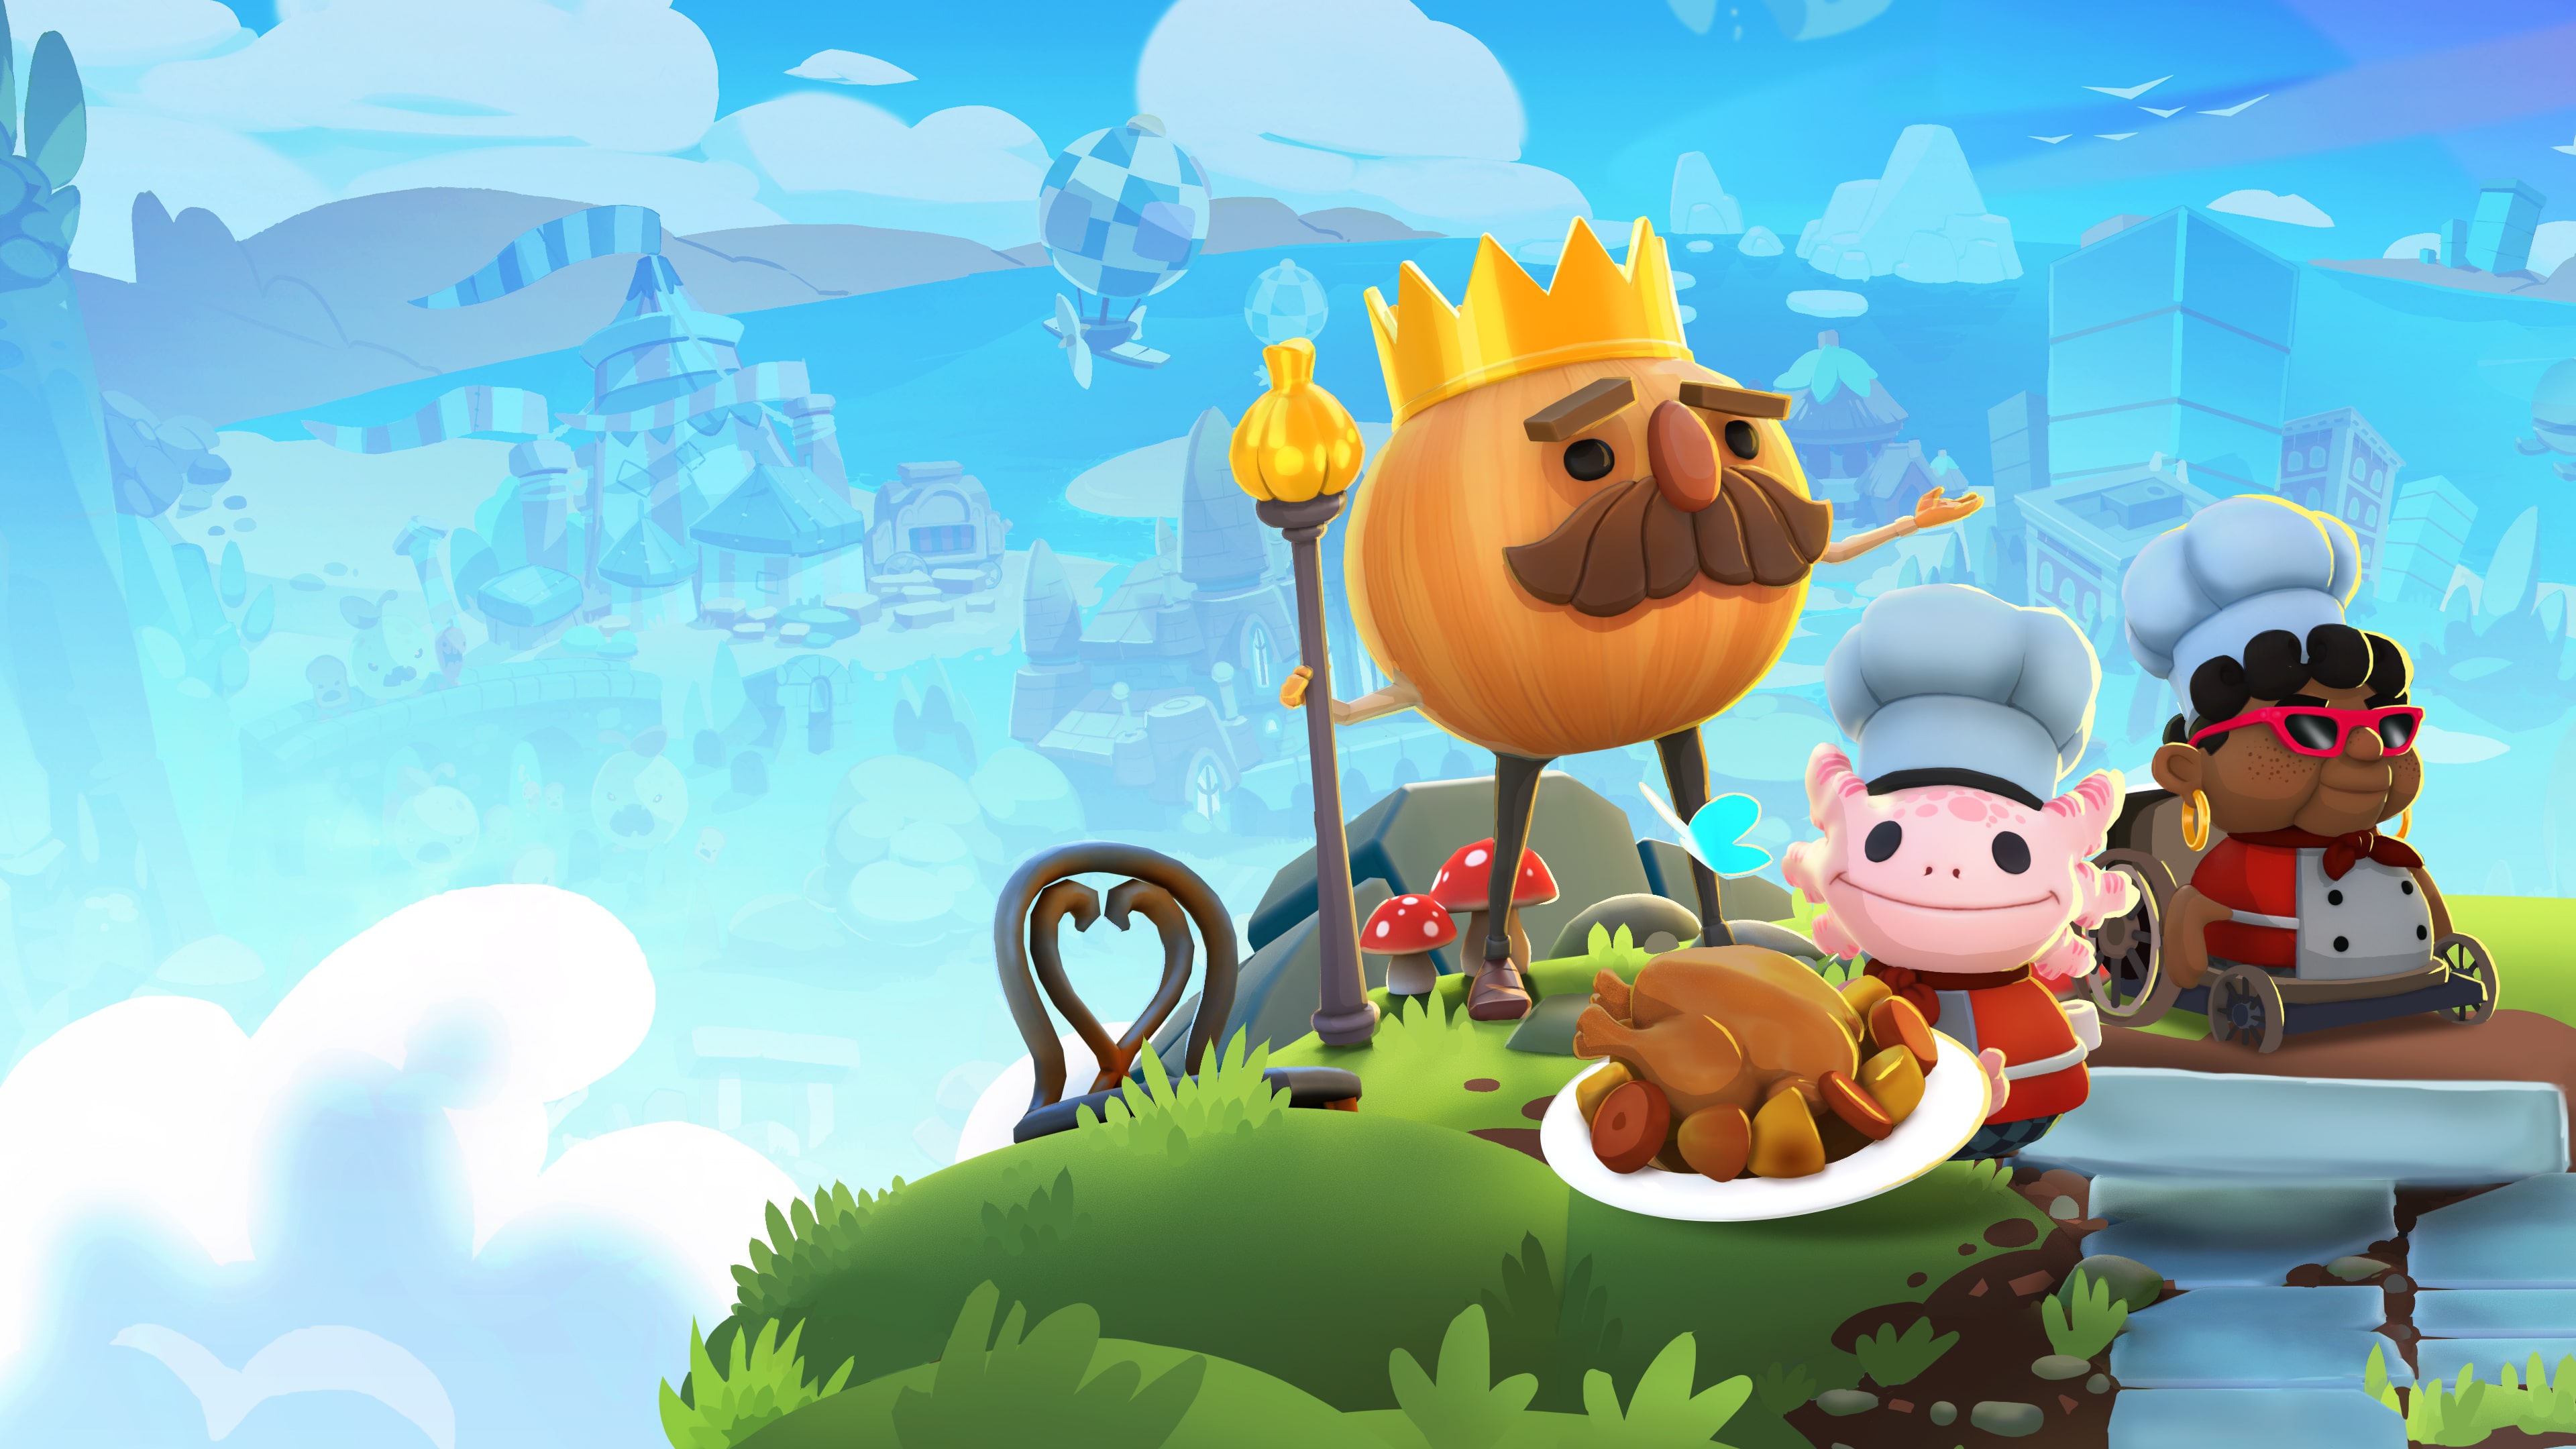 Overcooked! All You Can Eat (English/Chinese/Korean/Japanese Ver.)